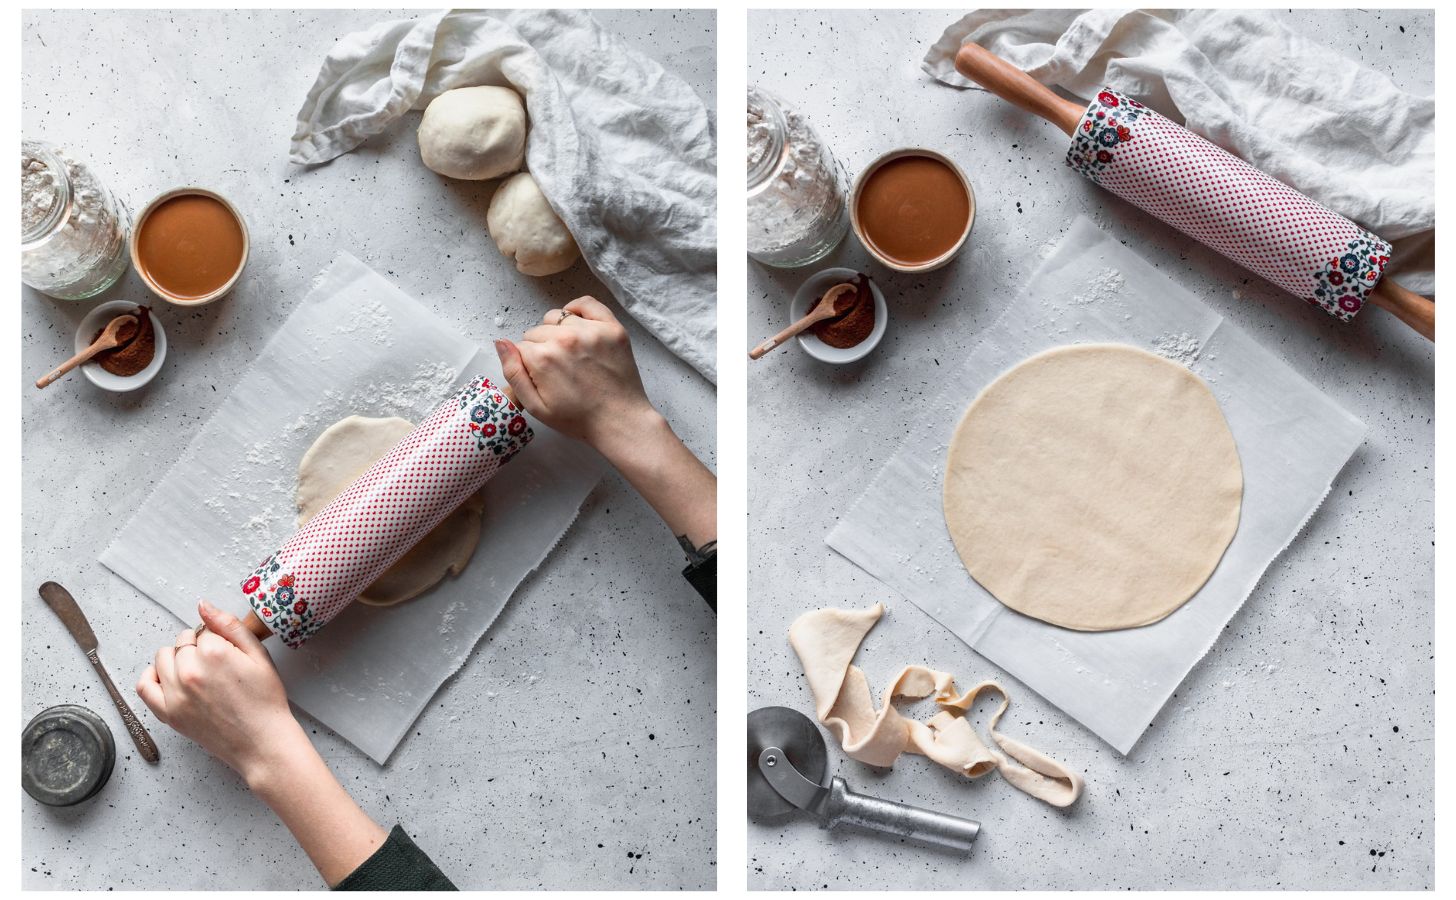 Two photos; on the left, a woman's hands rolling dough on a white counter next to a white linen, bowl of cinnamon, and bowl of cookie butter. On the right, the dough is cut into a round.